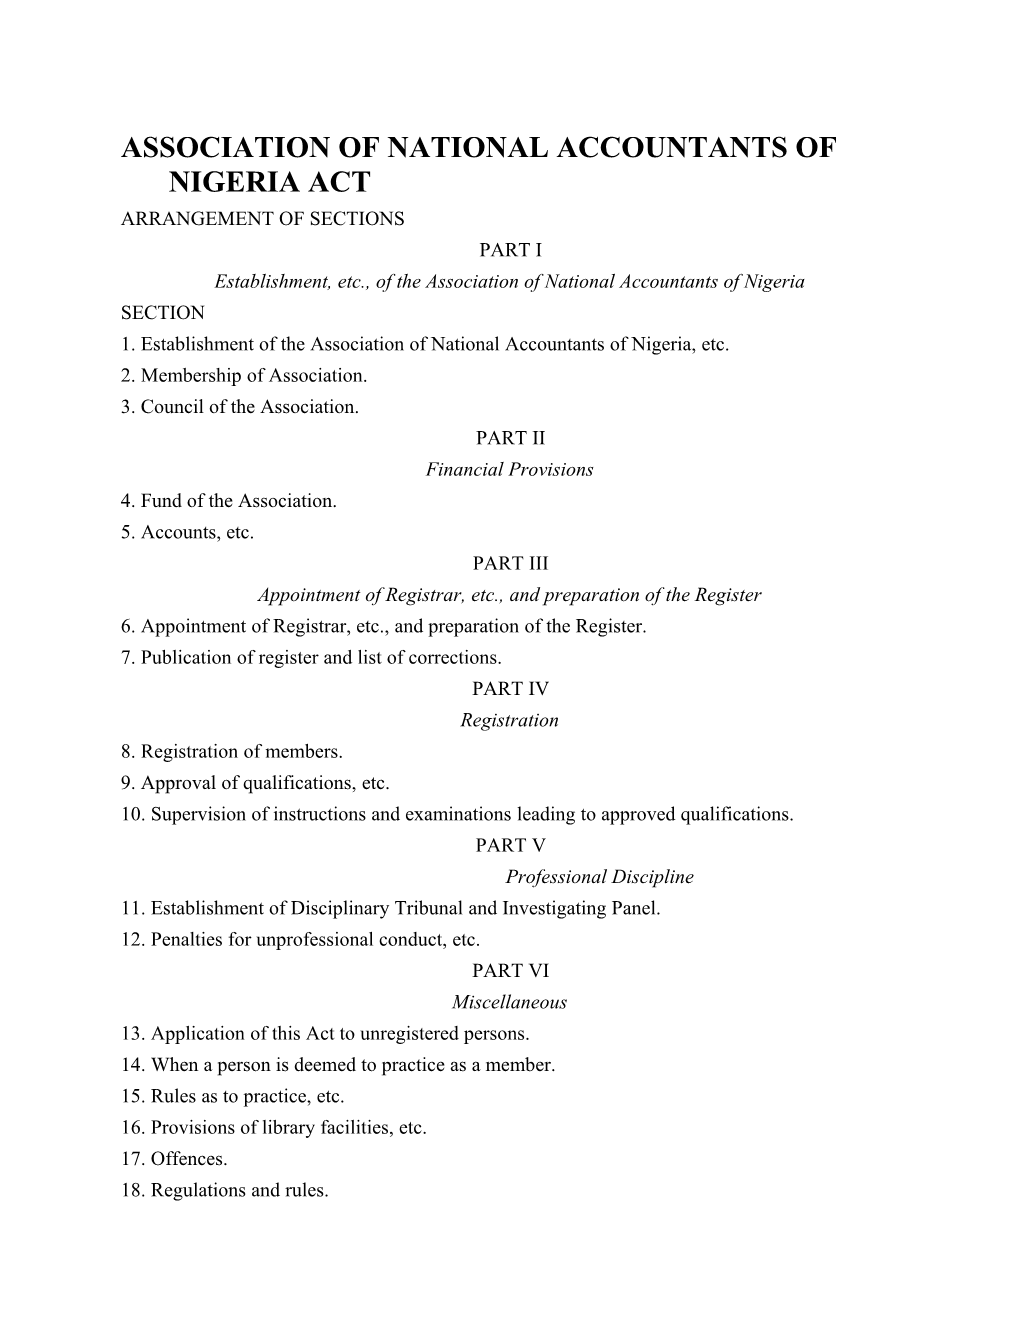 Association of National Accountants of Nigeria Act